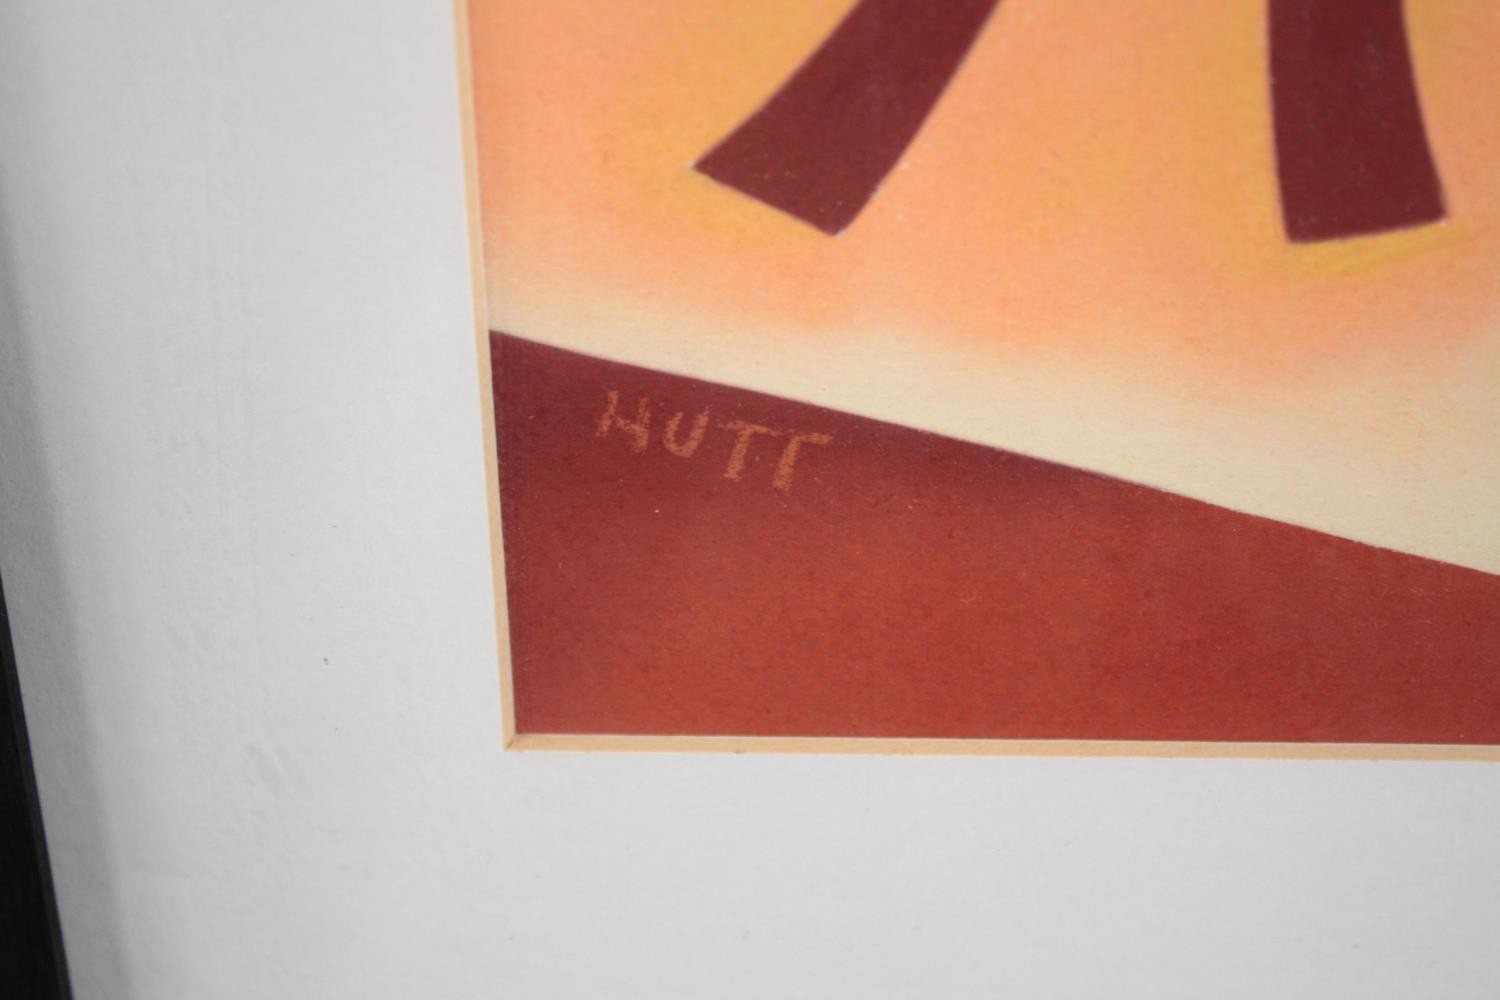 Print. Signed 'Hutt' in the plate. Framed and glazed. H.59 W.43cm. - Image 3 of 4